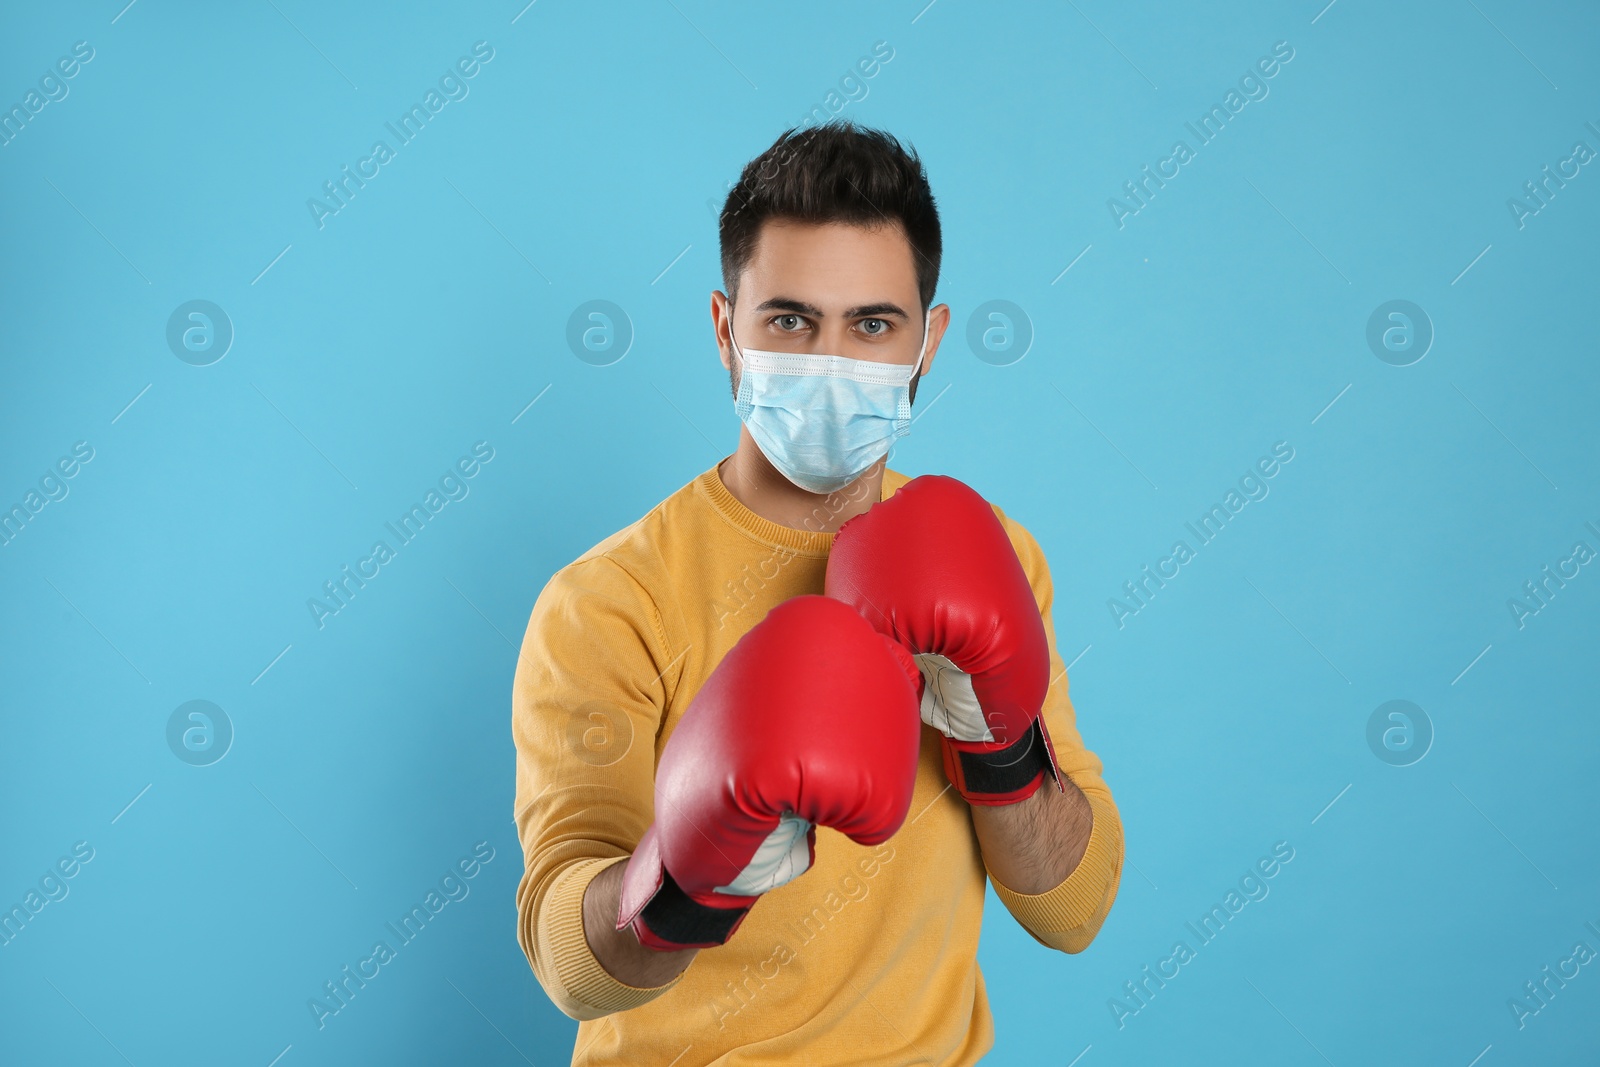 Photo of Man with protective mask and boxing gloves on light blue background. Strong immunity concept